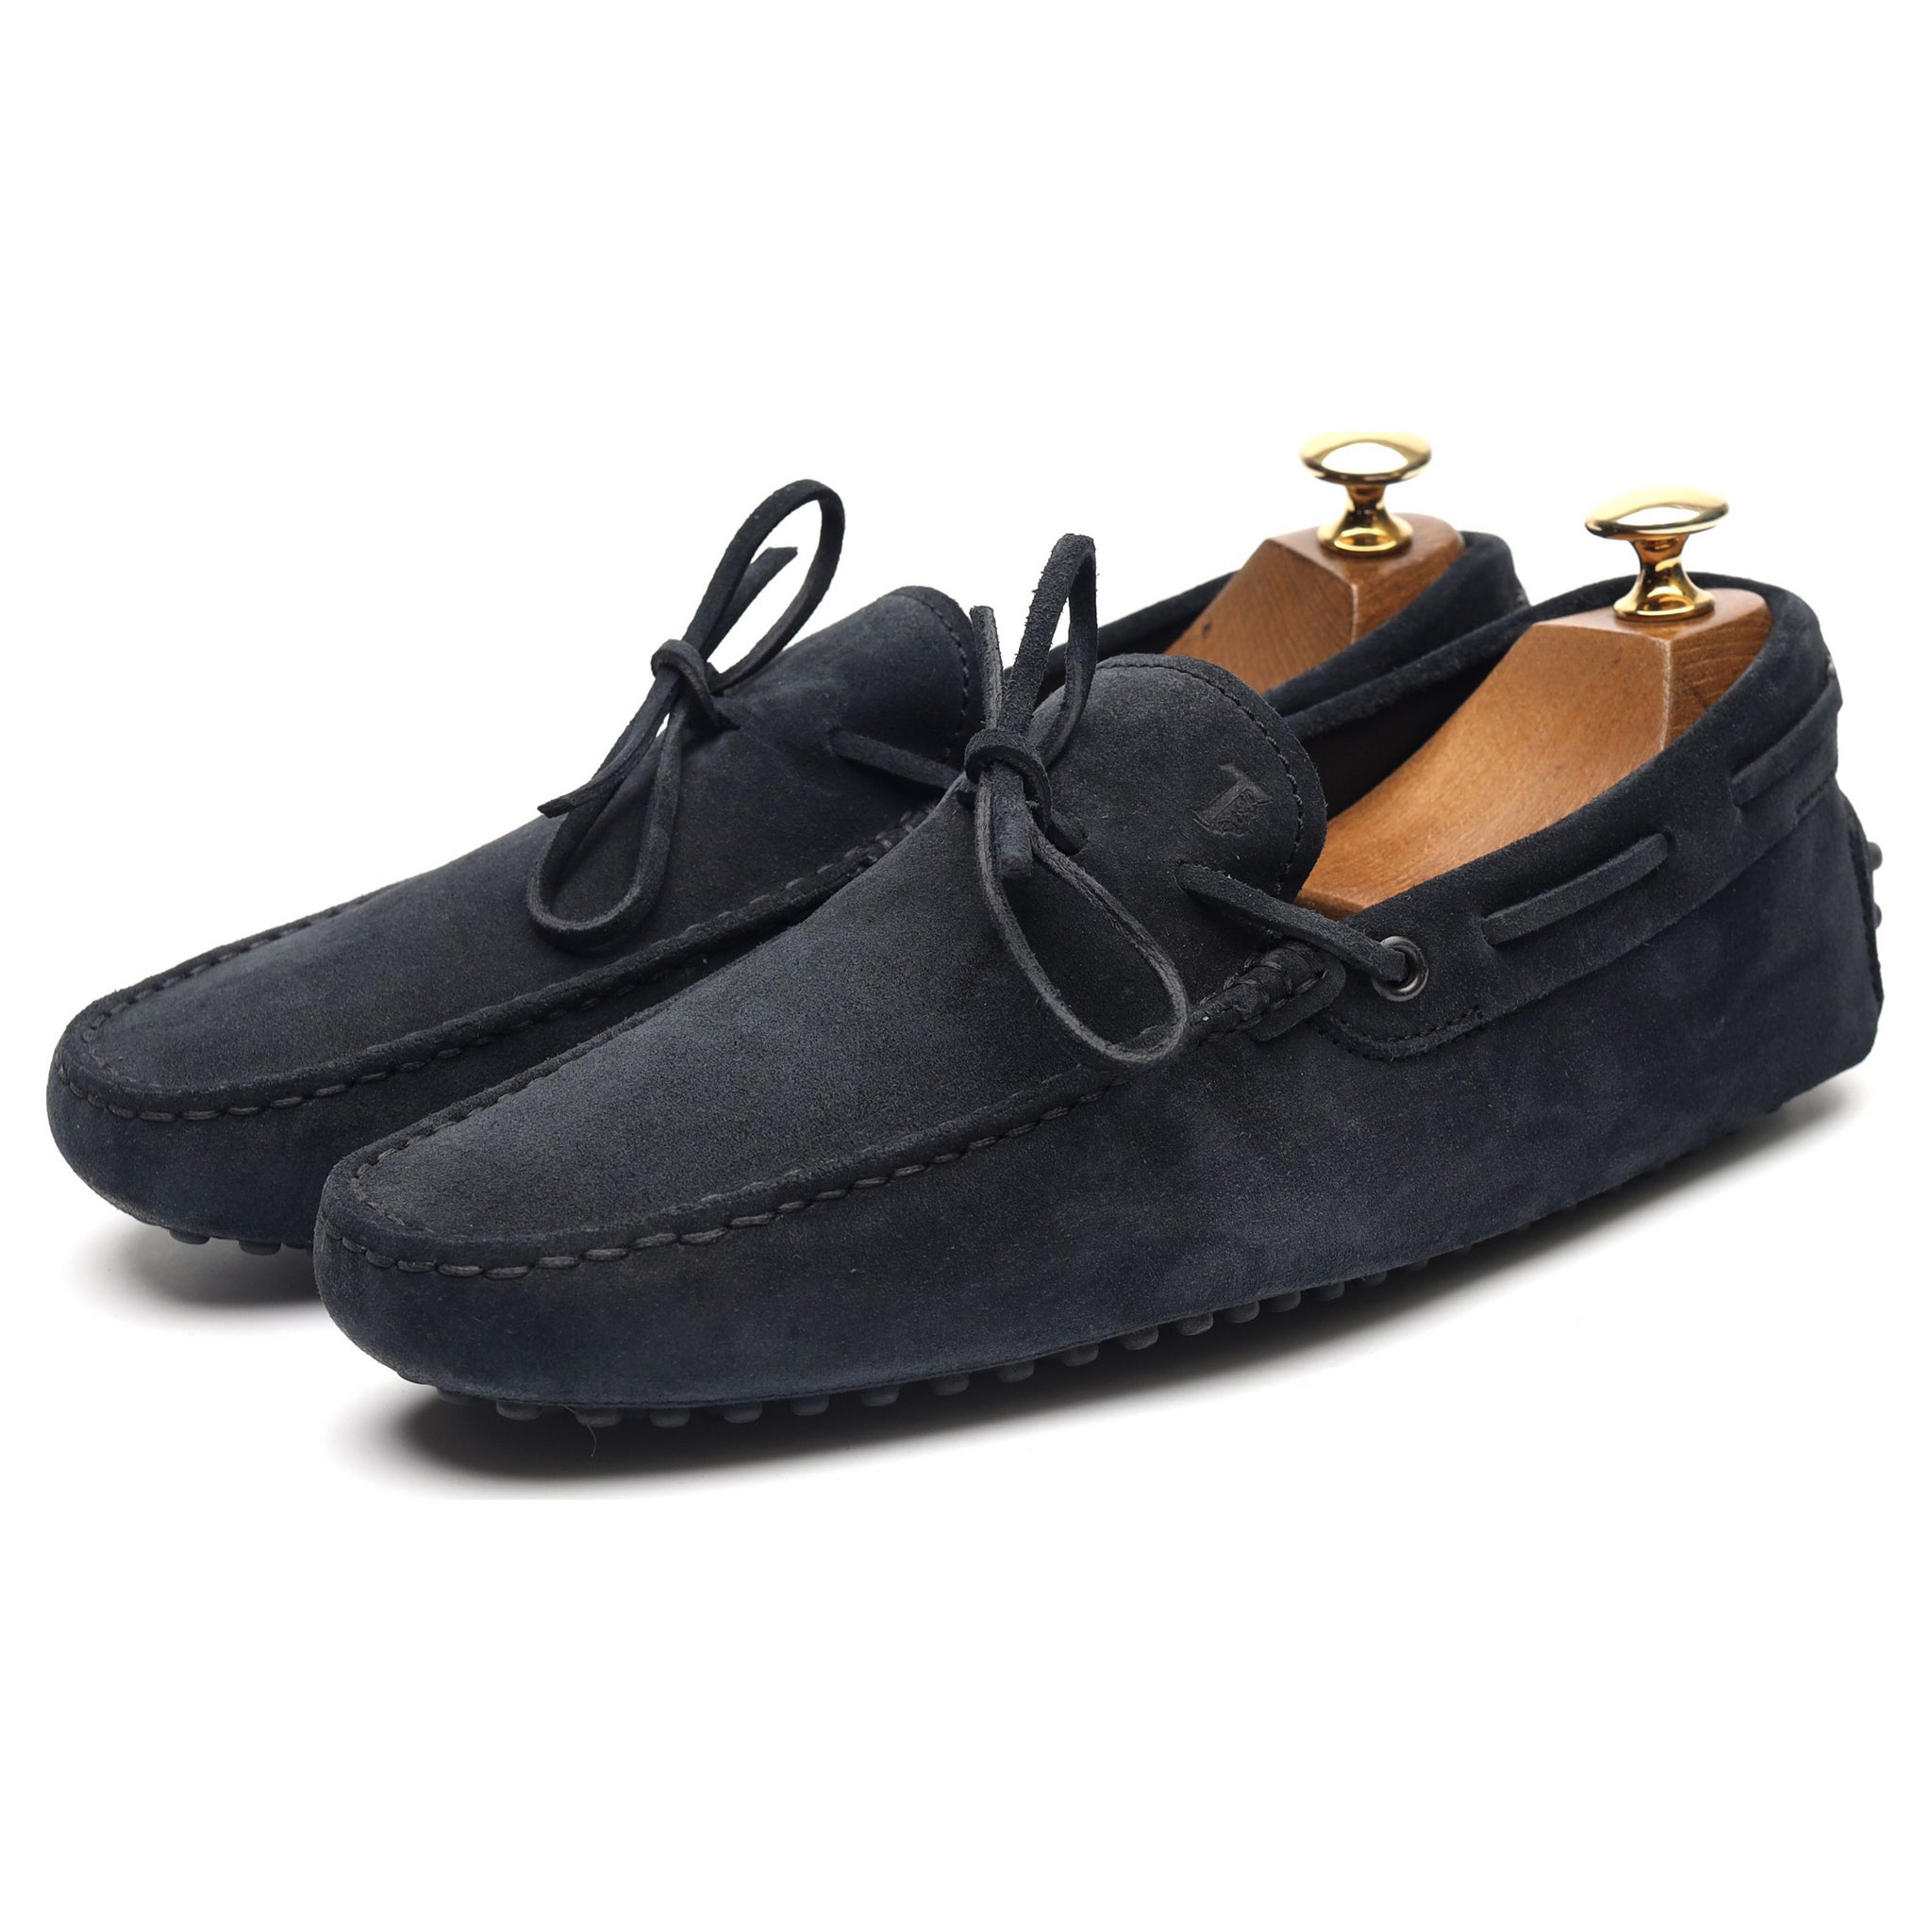 Blind Stadion morfin Gommino Navy Blue Suede Driving Loafers UK 6 - Abbot's Shoes